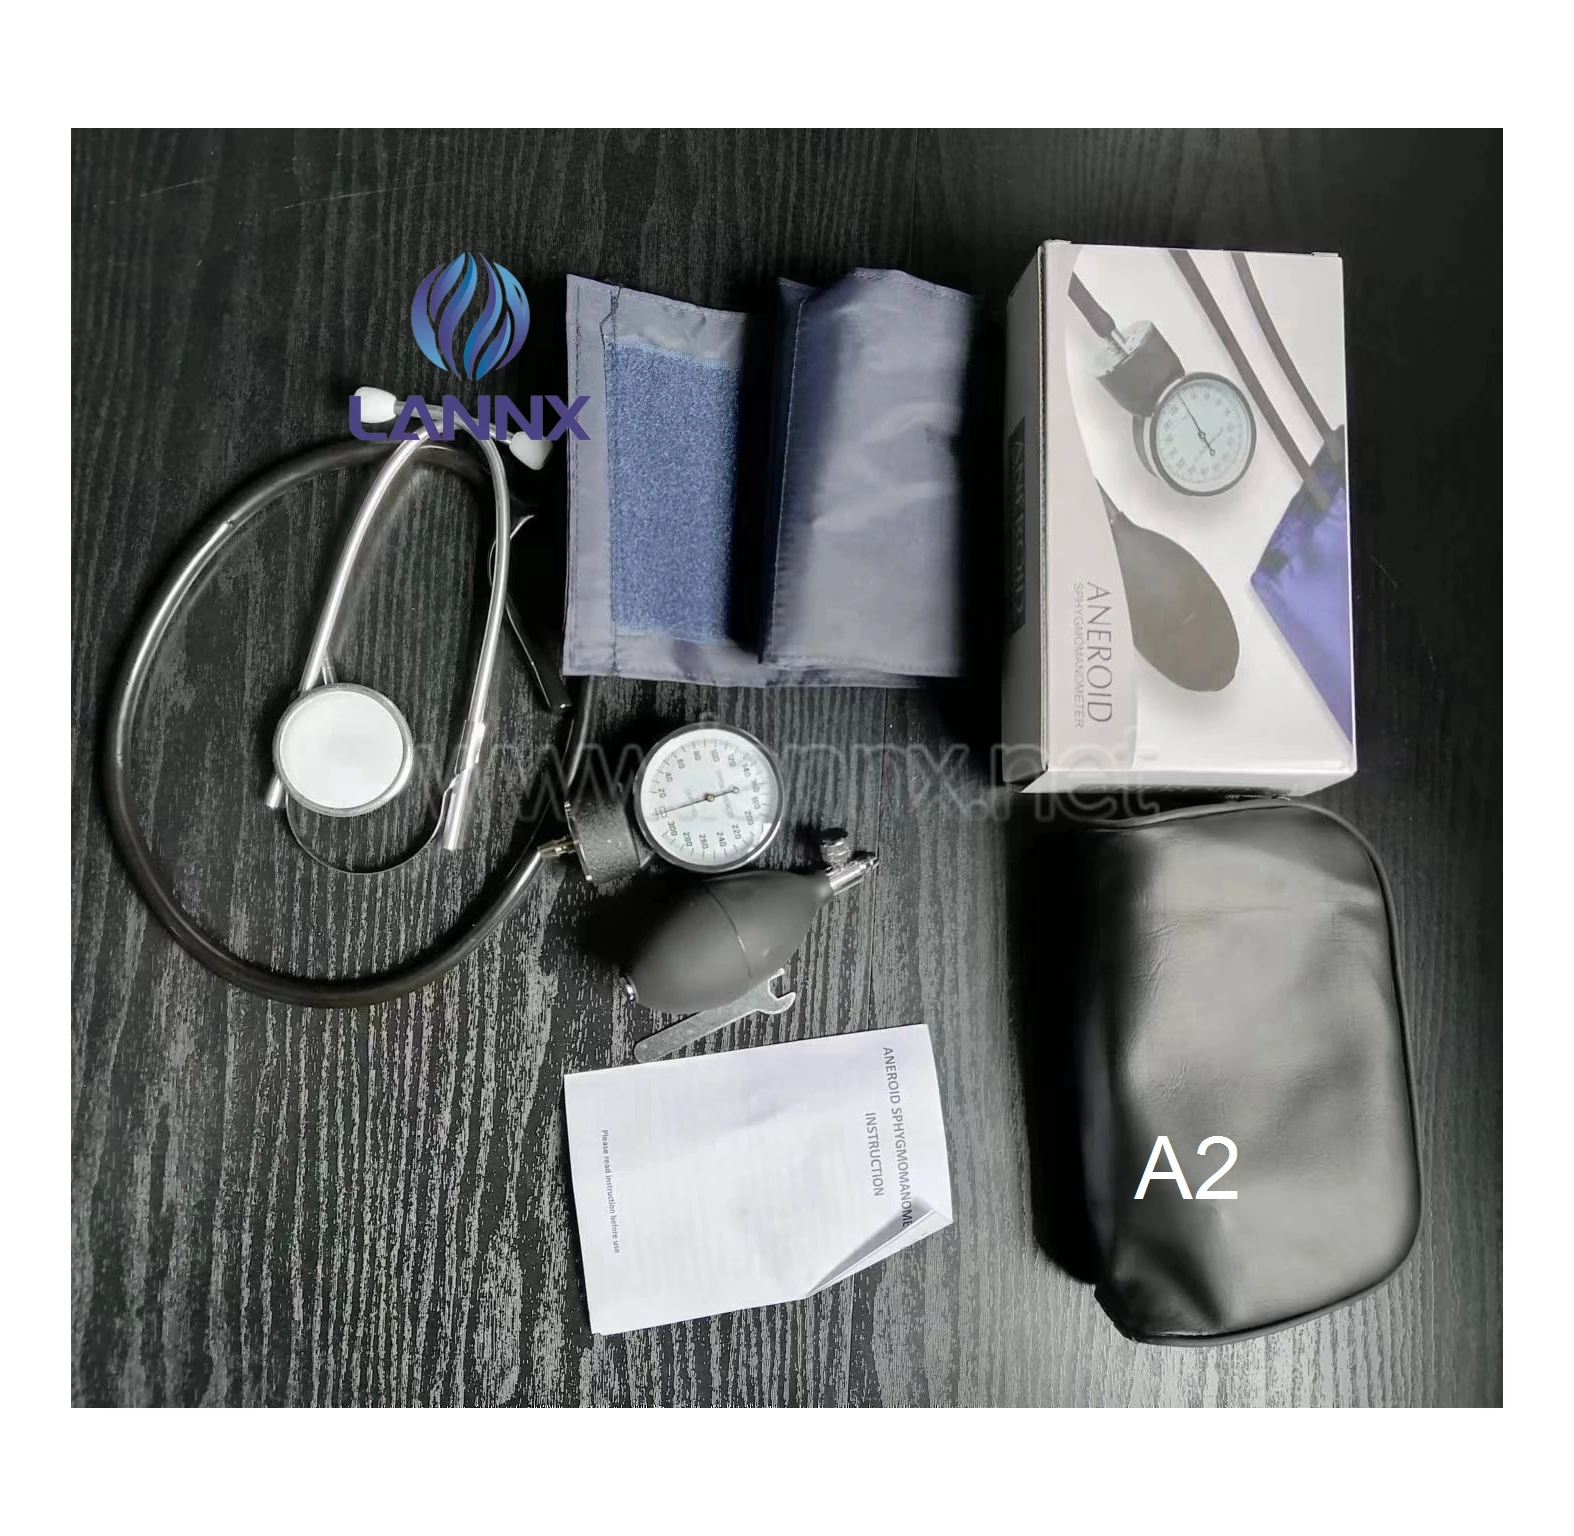 

LANNX A2 Household Material Blood Pressure Monitor and Stethoscope Kit Upper Arm Aneroid sphygmomanometer With Stethoscope